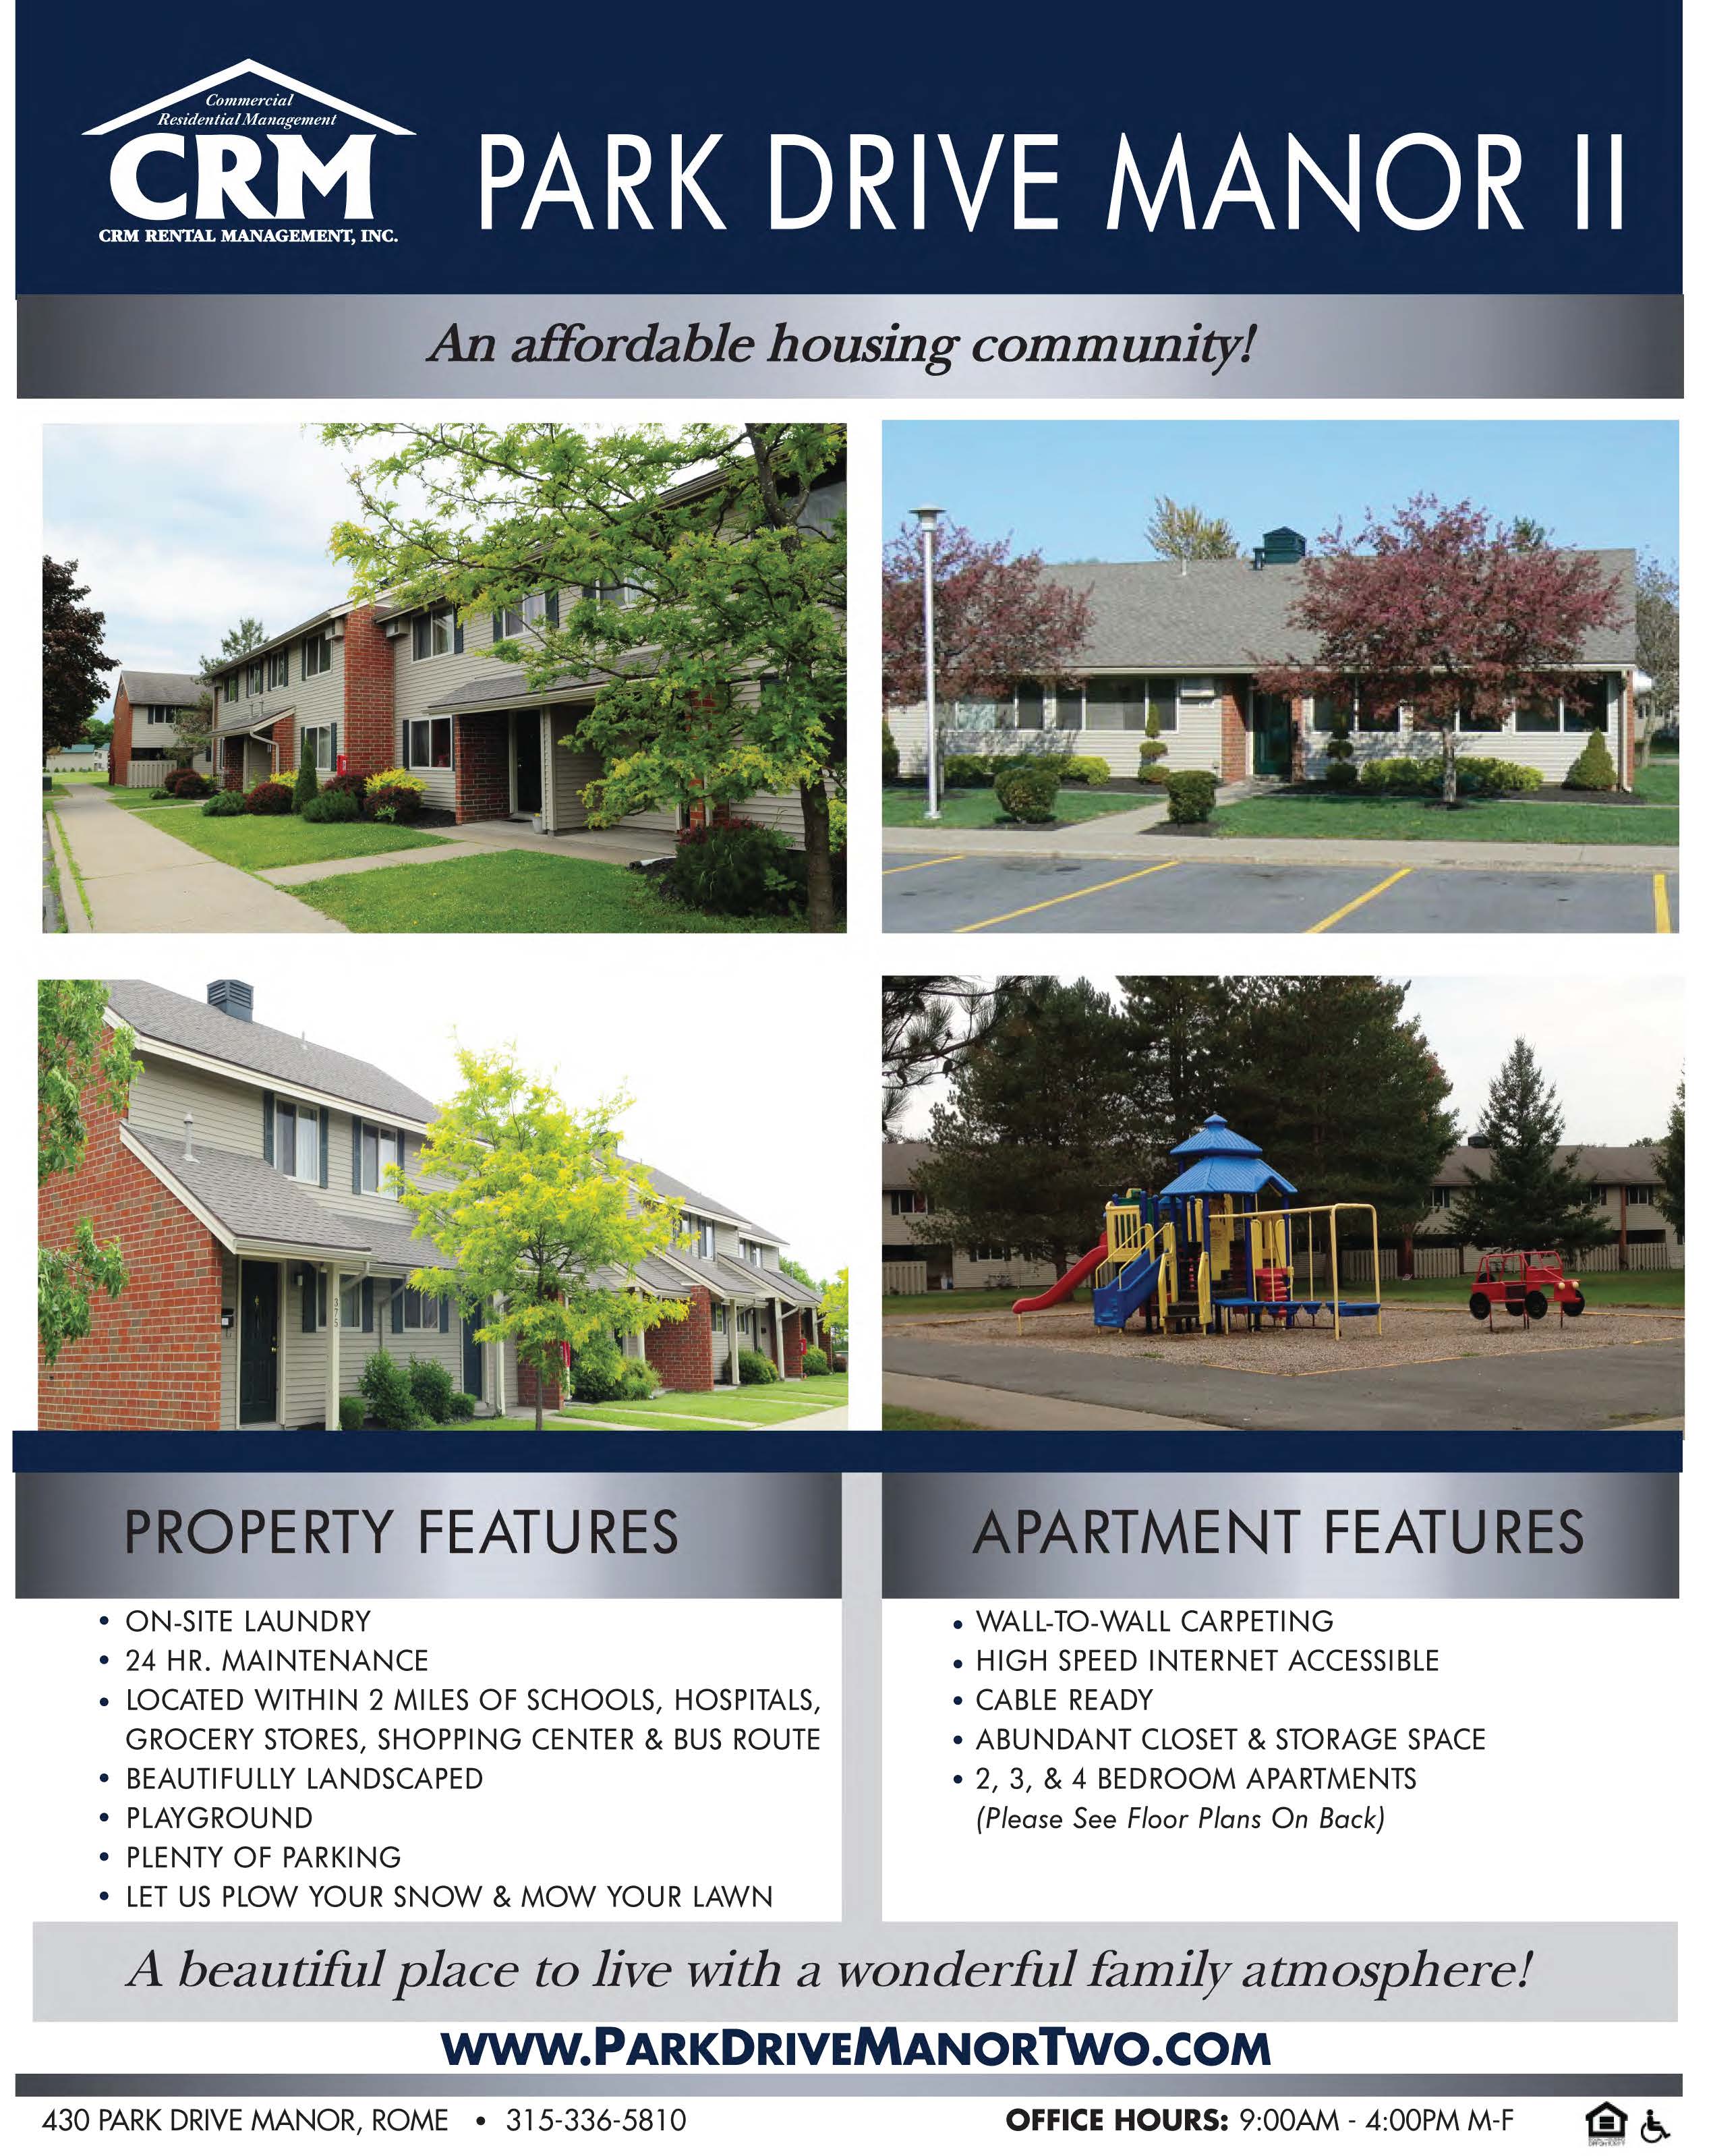 Park Drive Manor 2 Brochure Page 1 of 2